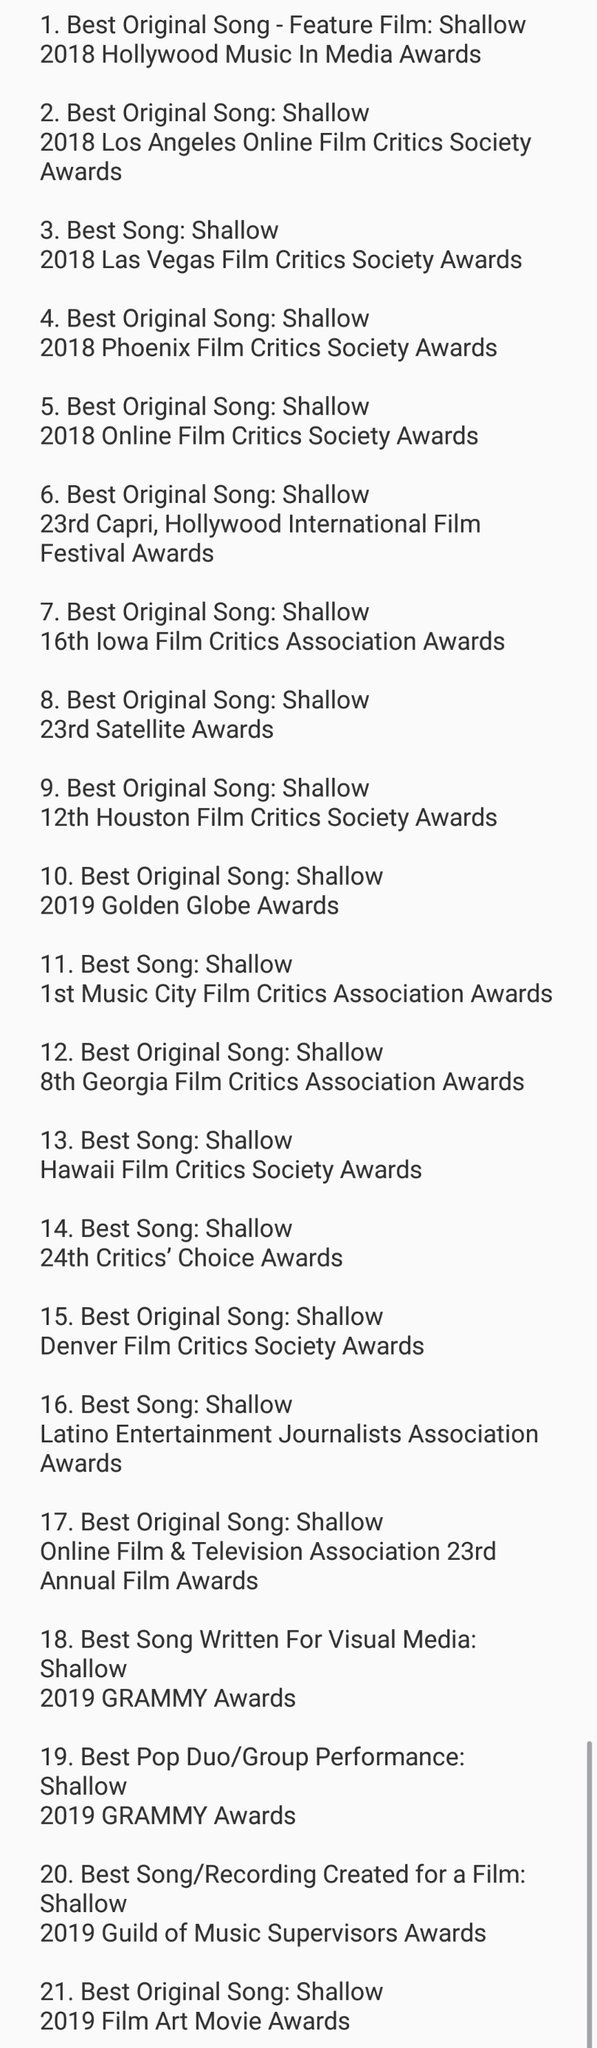 idk on Twitter: "Here is the list of all the awards #Shallow has won and in order. It currently 21 awards all for the song, and NOT the video. It's still